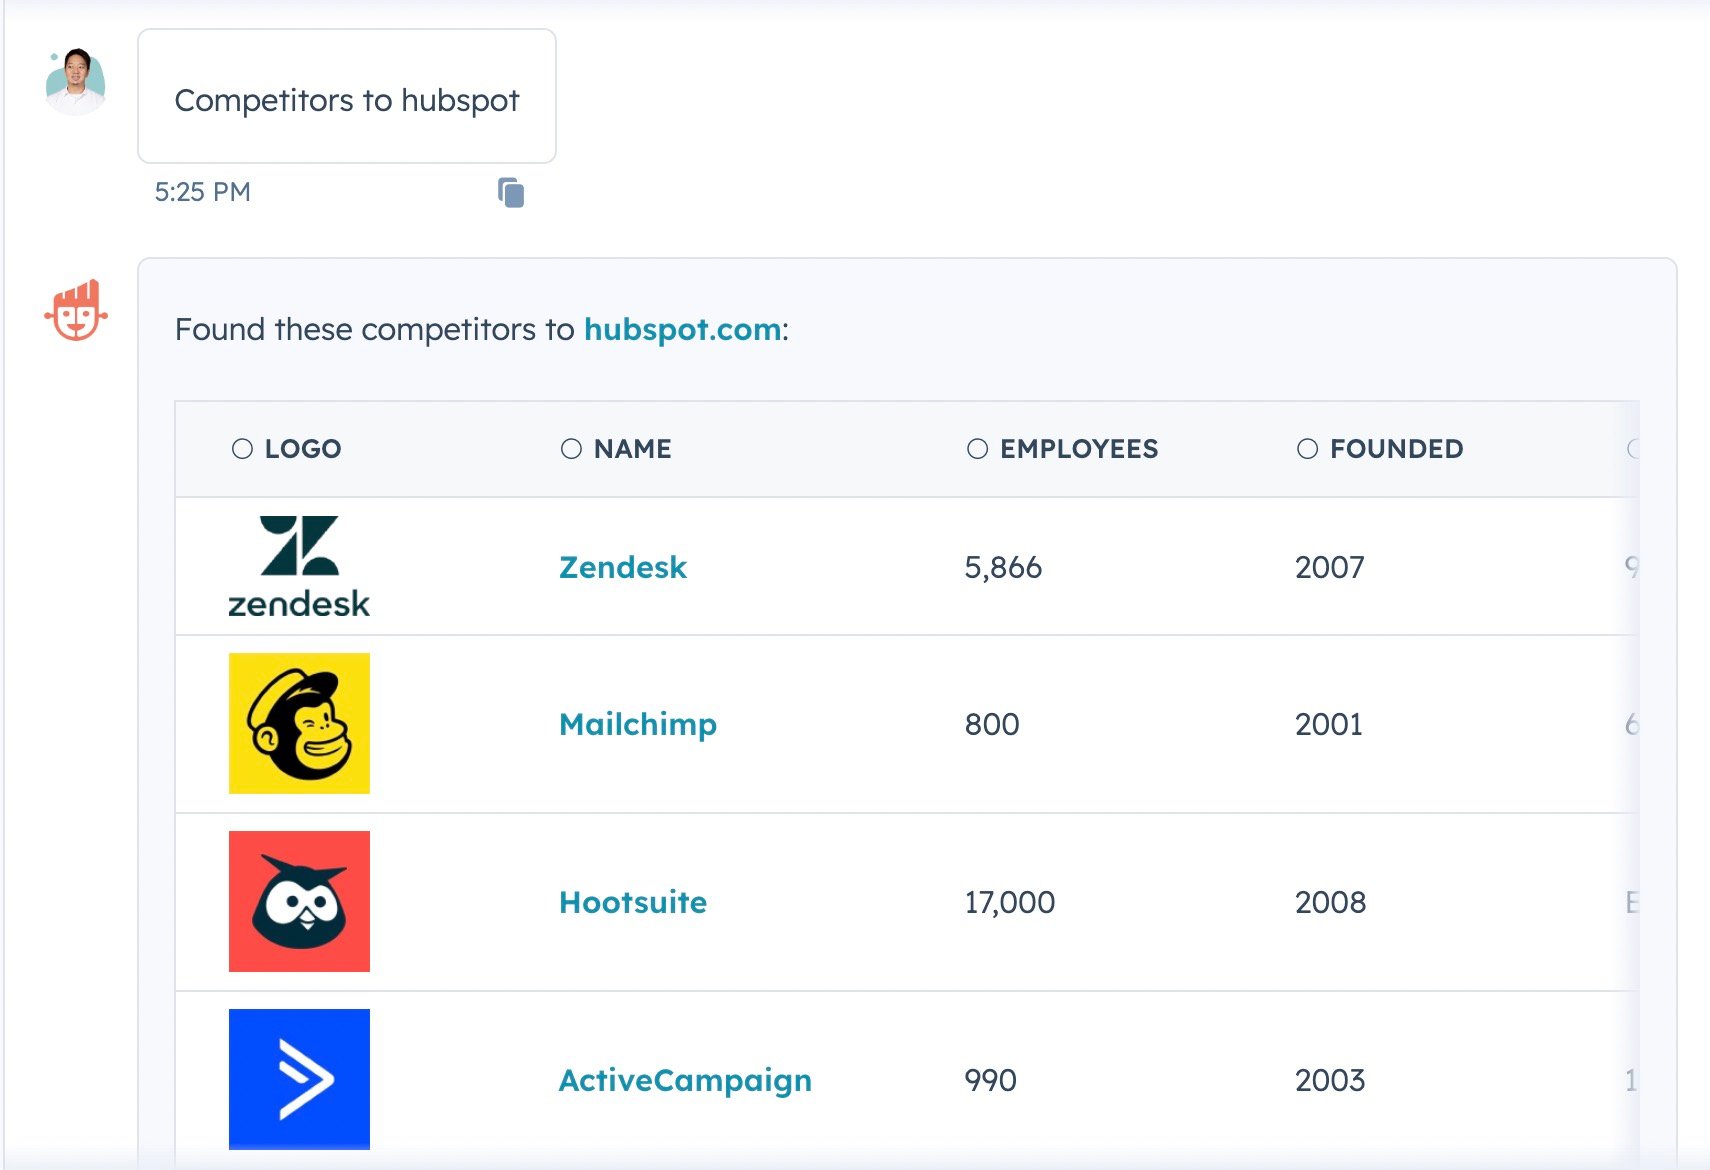 chatspot_competitor to hubspot